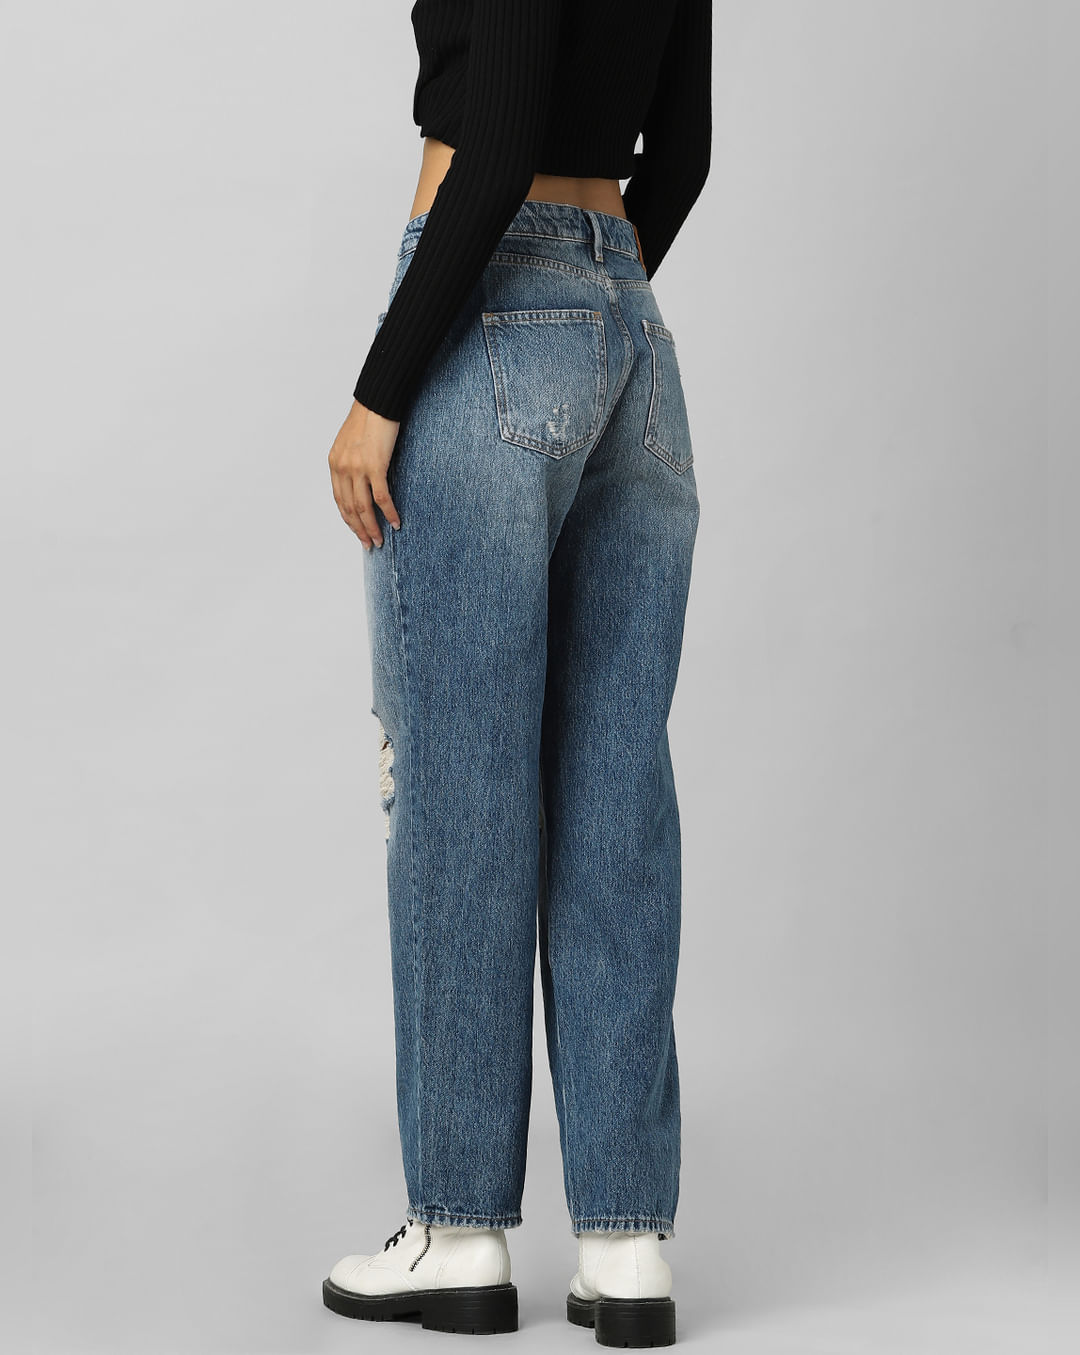 Embellished ribbed-jersey bootcut pants